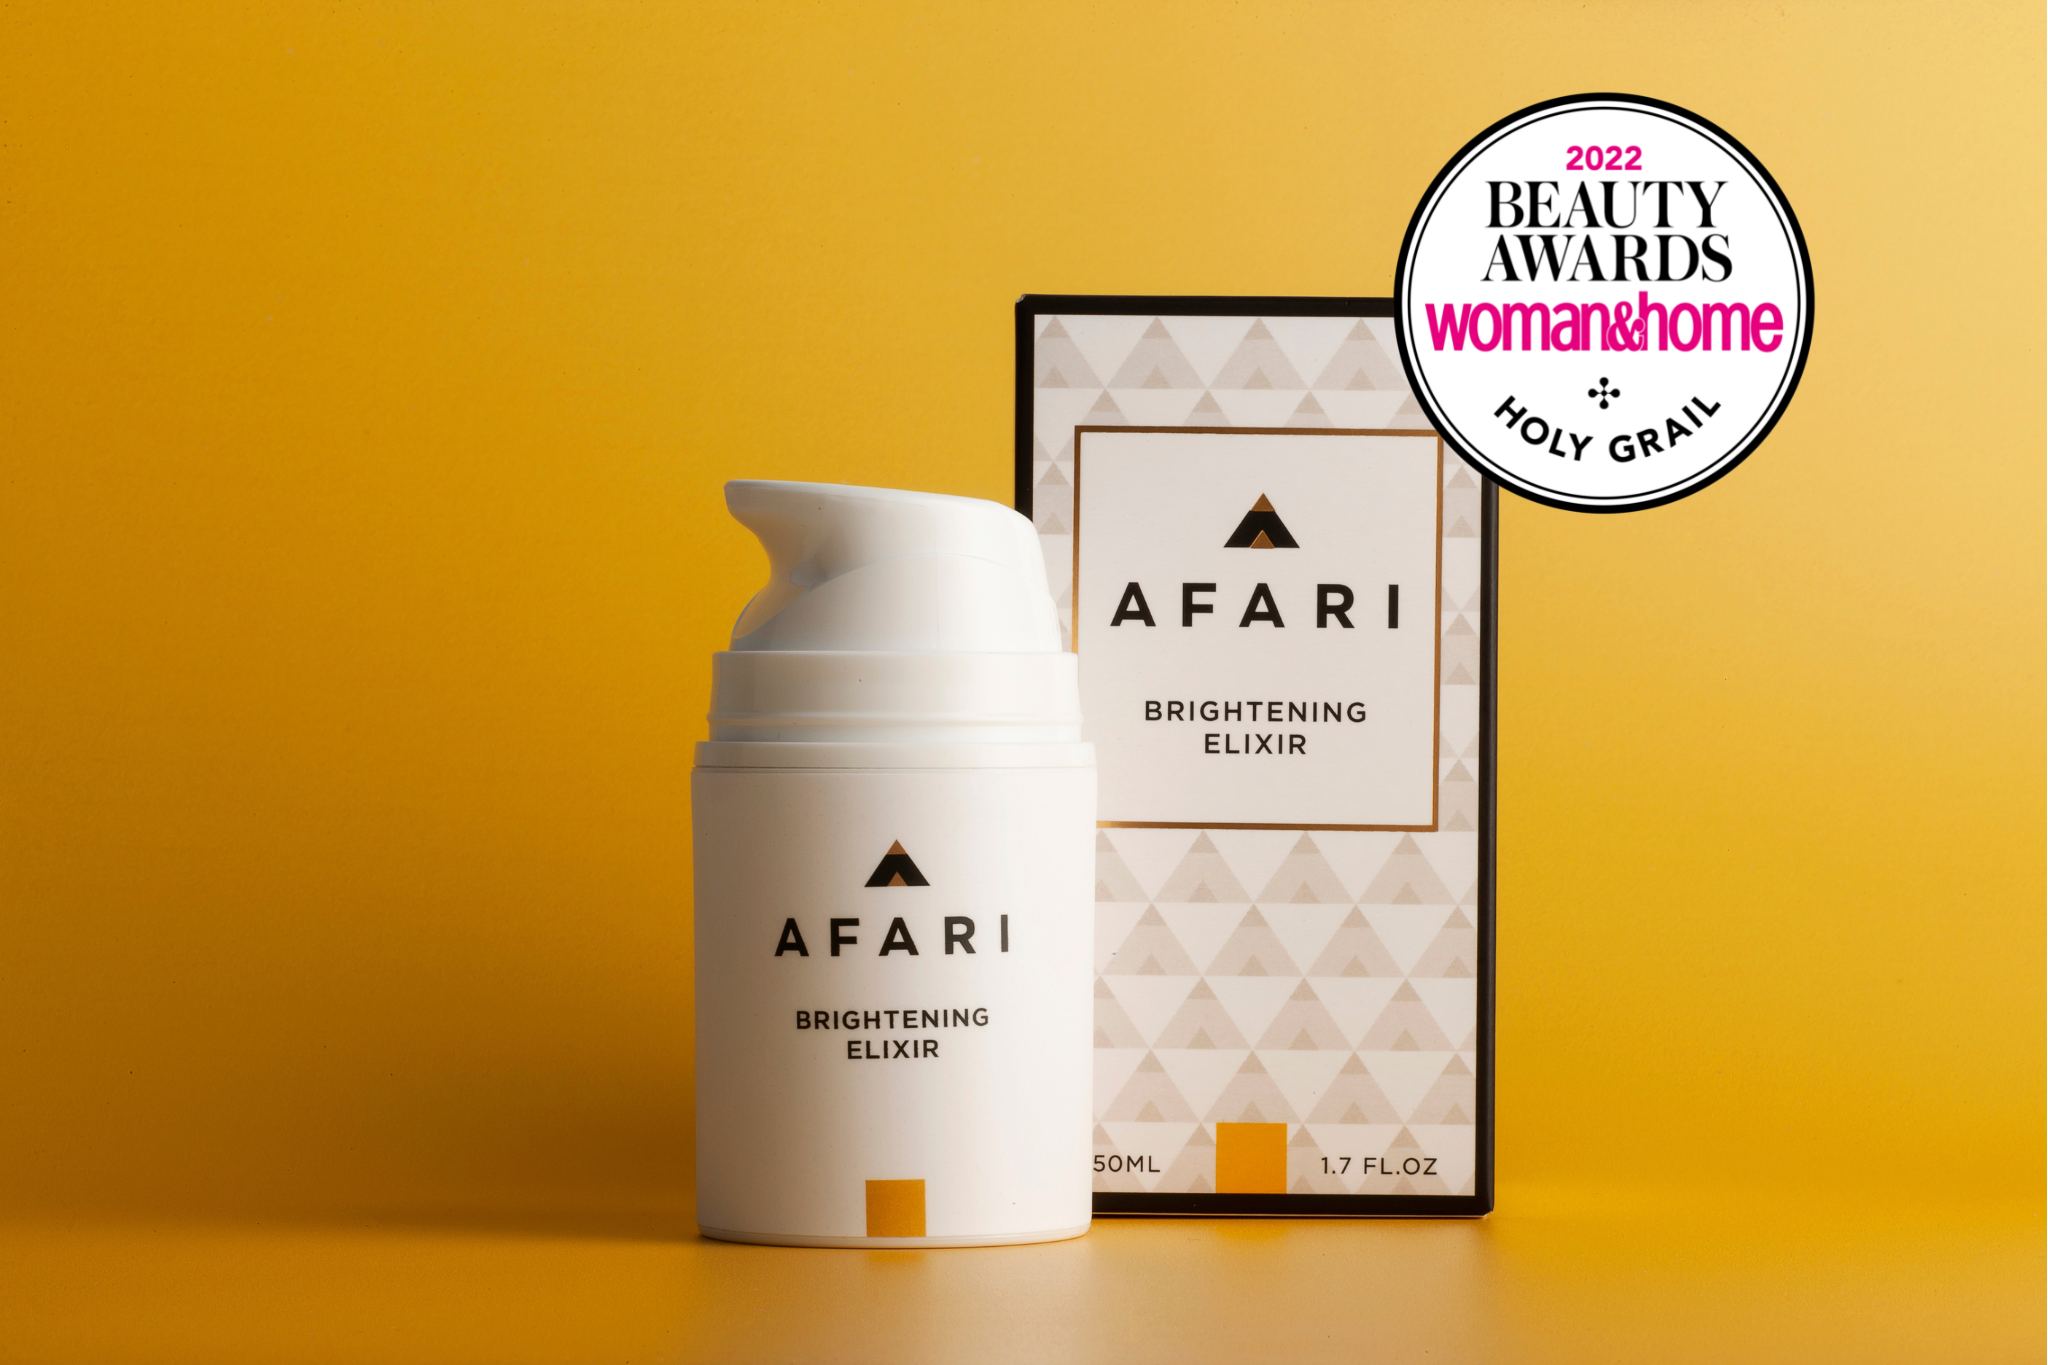 Award winning Brightening Elixir Serum - Afari Skincare South Africa enriched with indigenous Bulbine which helps even skin tone and fade dark marks and spots